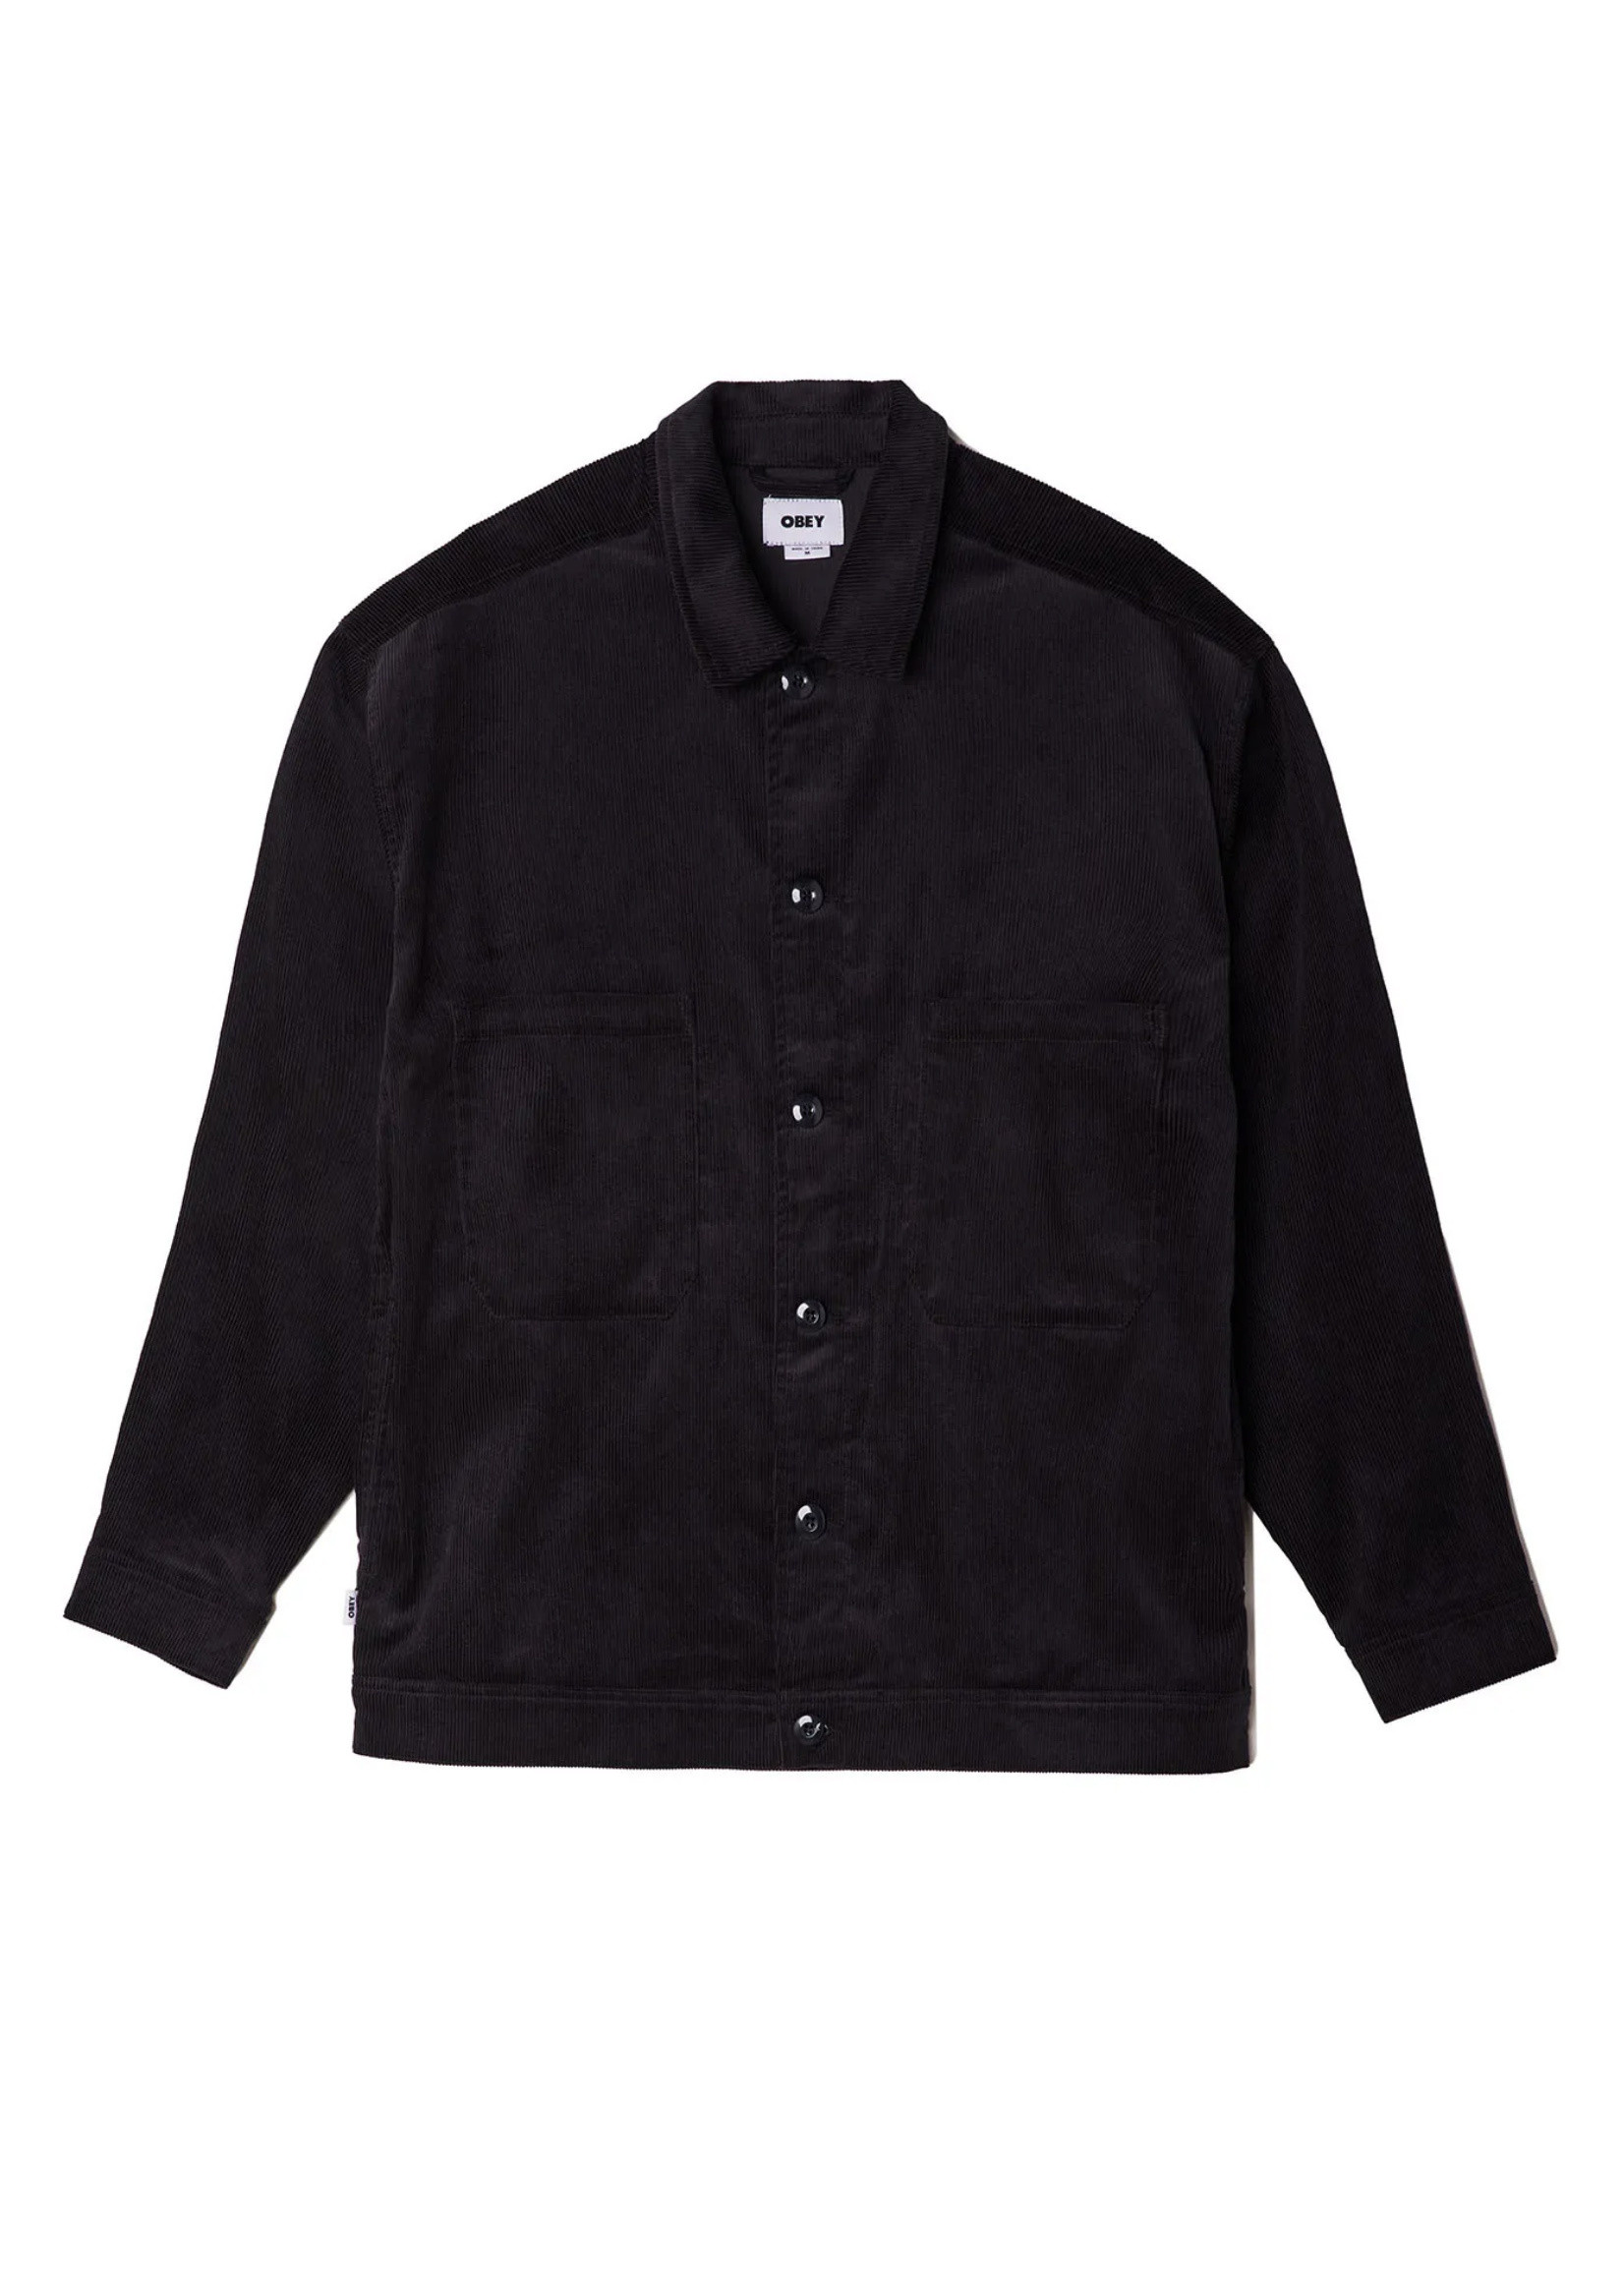 OBEY OBEY / Marquee Shirt Jacket